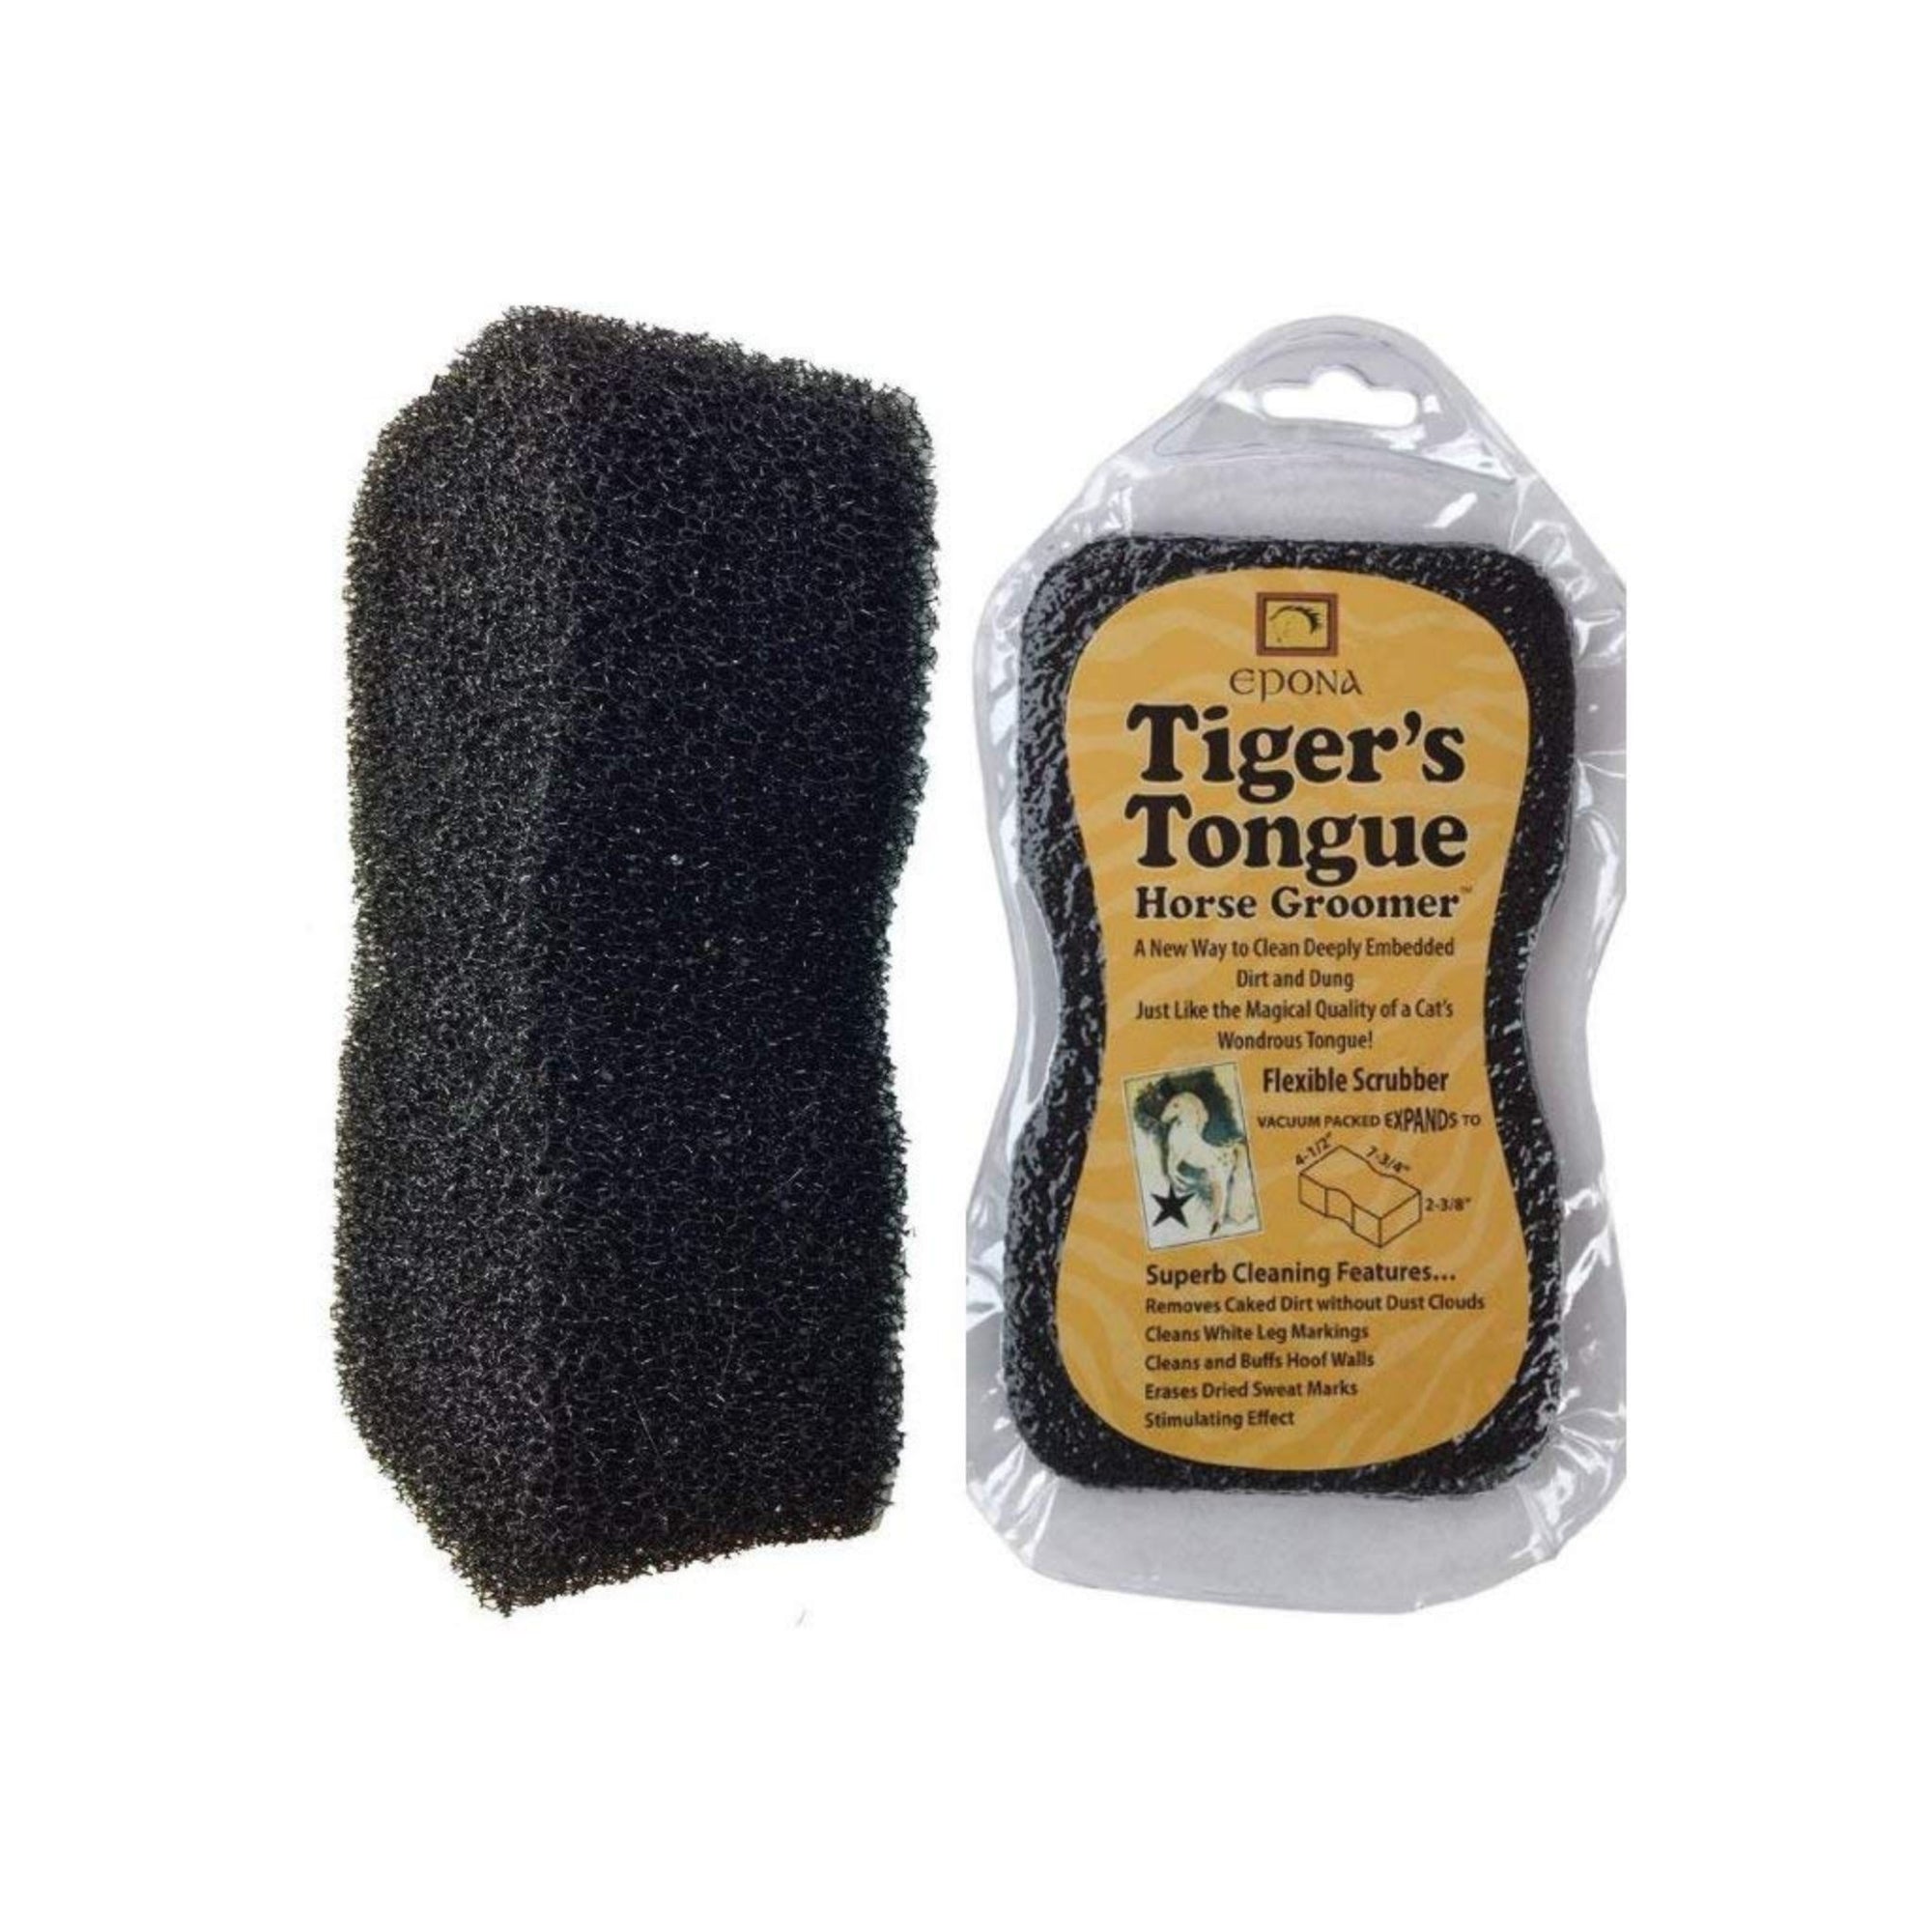 Two "Tiger's Tongues", one in compressed packaged form, and the other expanded.